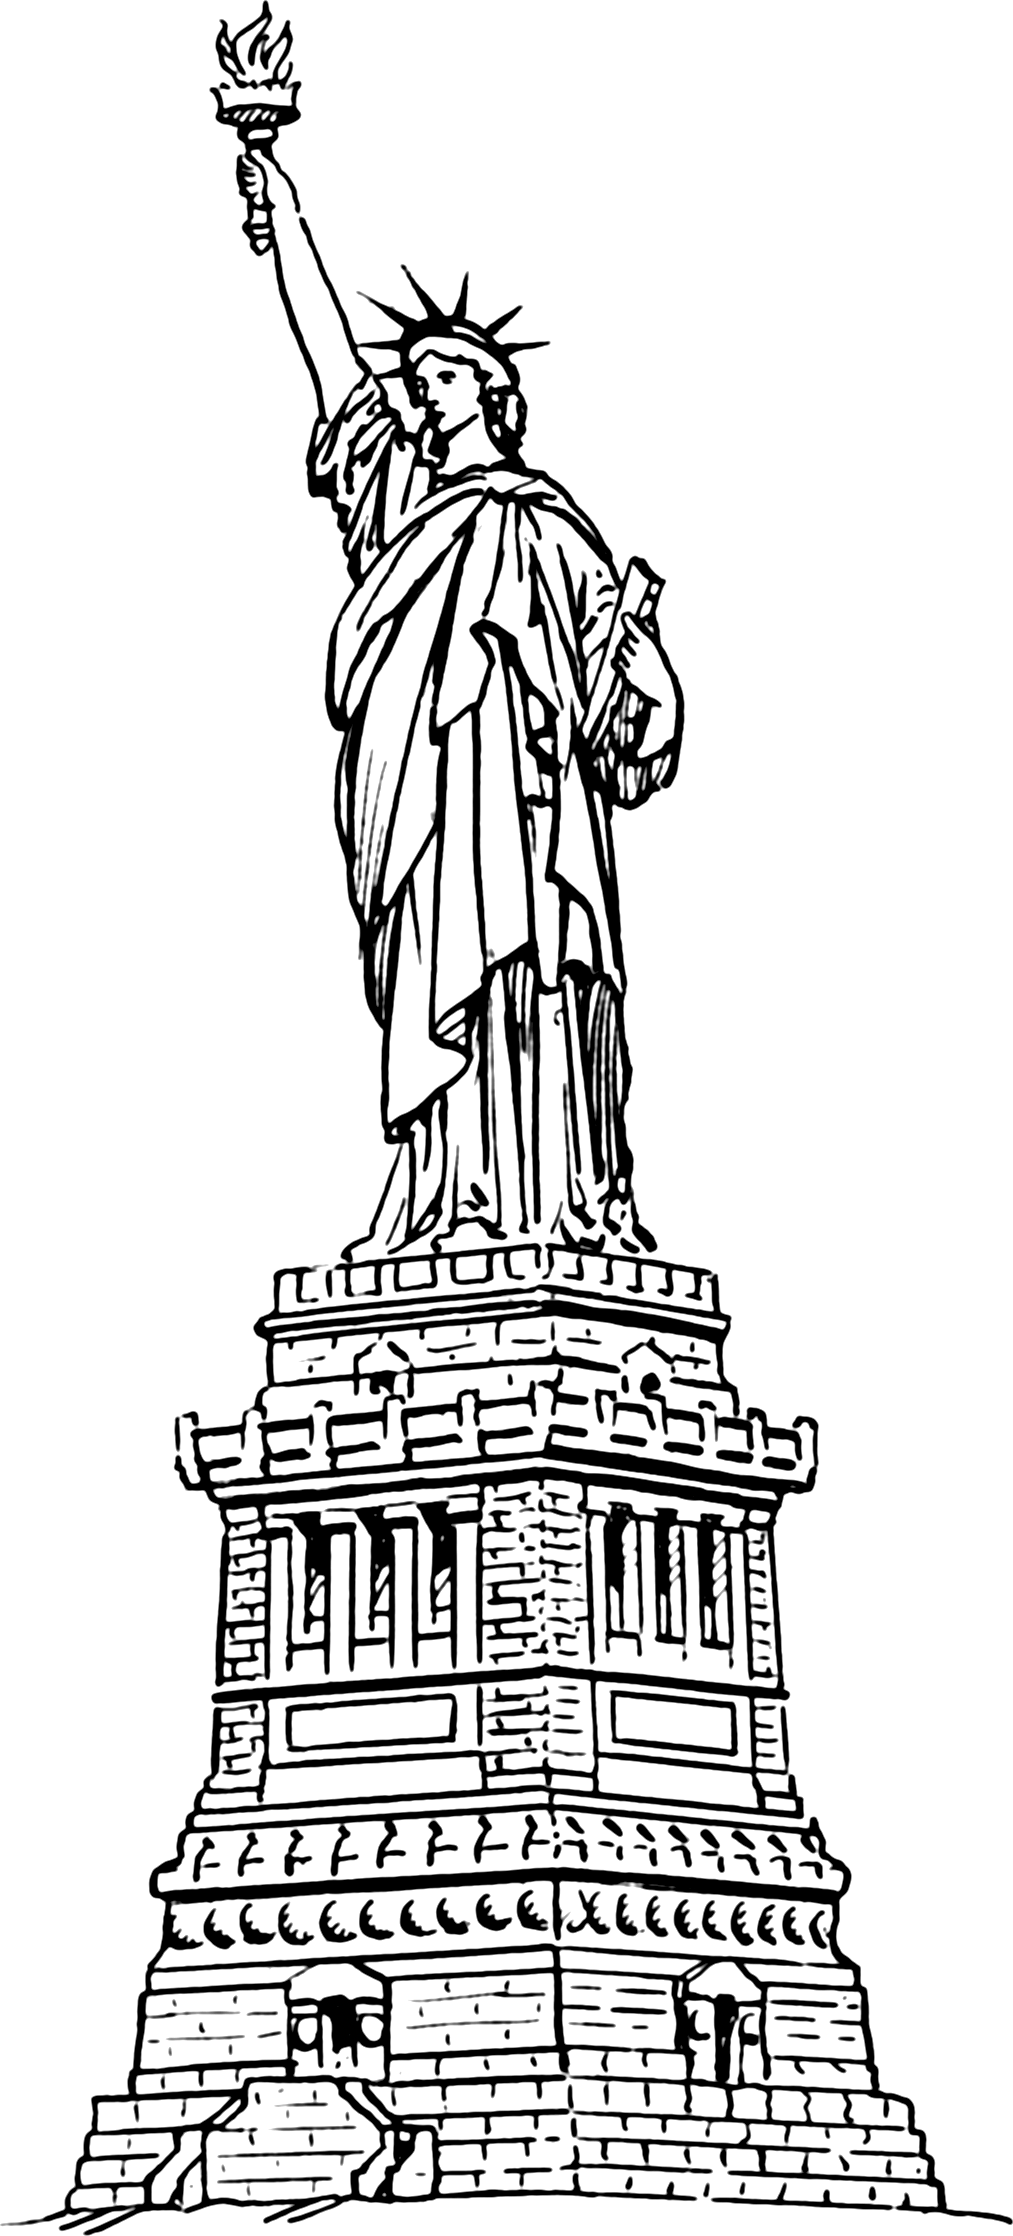 Images For > Statue Of Liberty Silhouette Clip Art